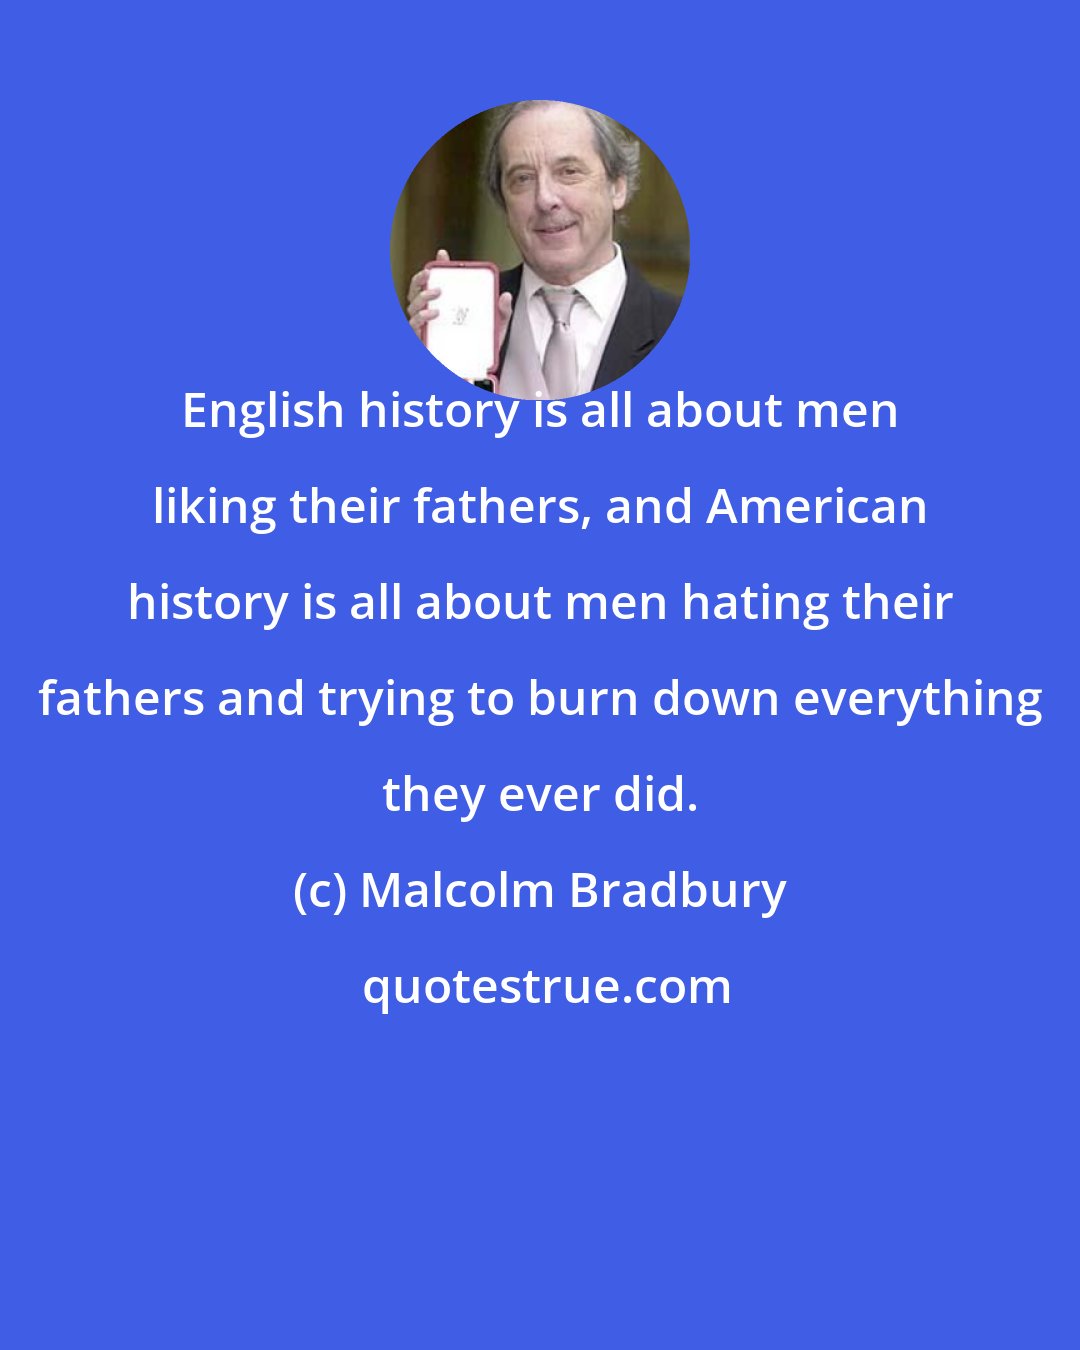 Malcolm Bradbury: English history is all about men liking their fathers, and American history is all about men hating their fathers and trying to burn down everything they ever did.